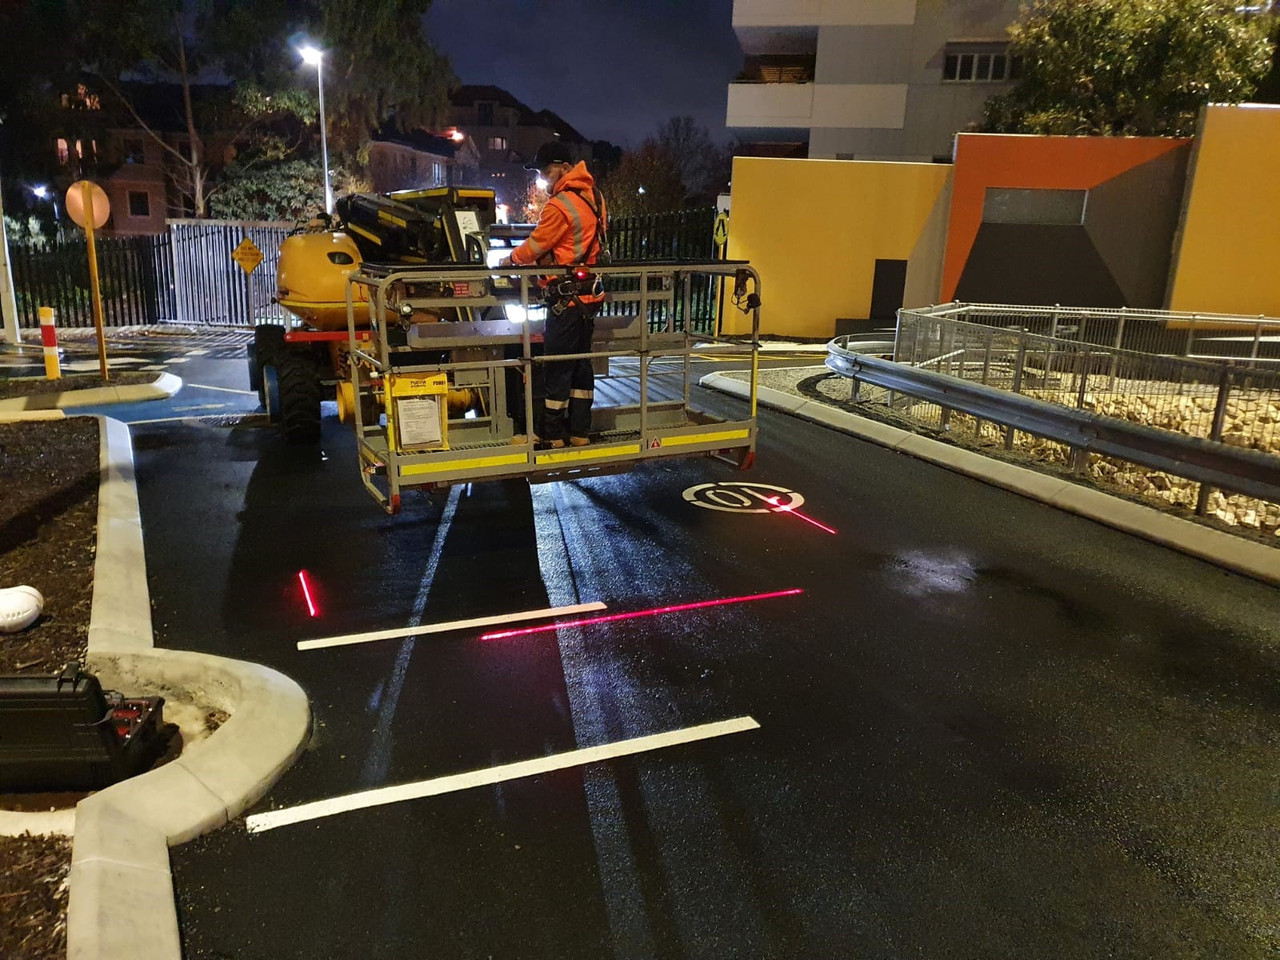 1. Laser Safety Halo Red Line Boundary Beam. Workplace Safety Exclusion Zone Around Workplace Machinery. Mining, Danger Zone, Exclusion Zone. Forklift Exclusion Zones. Transport Vehicle Loading Bay Exclusion Zones.